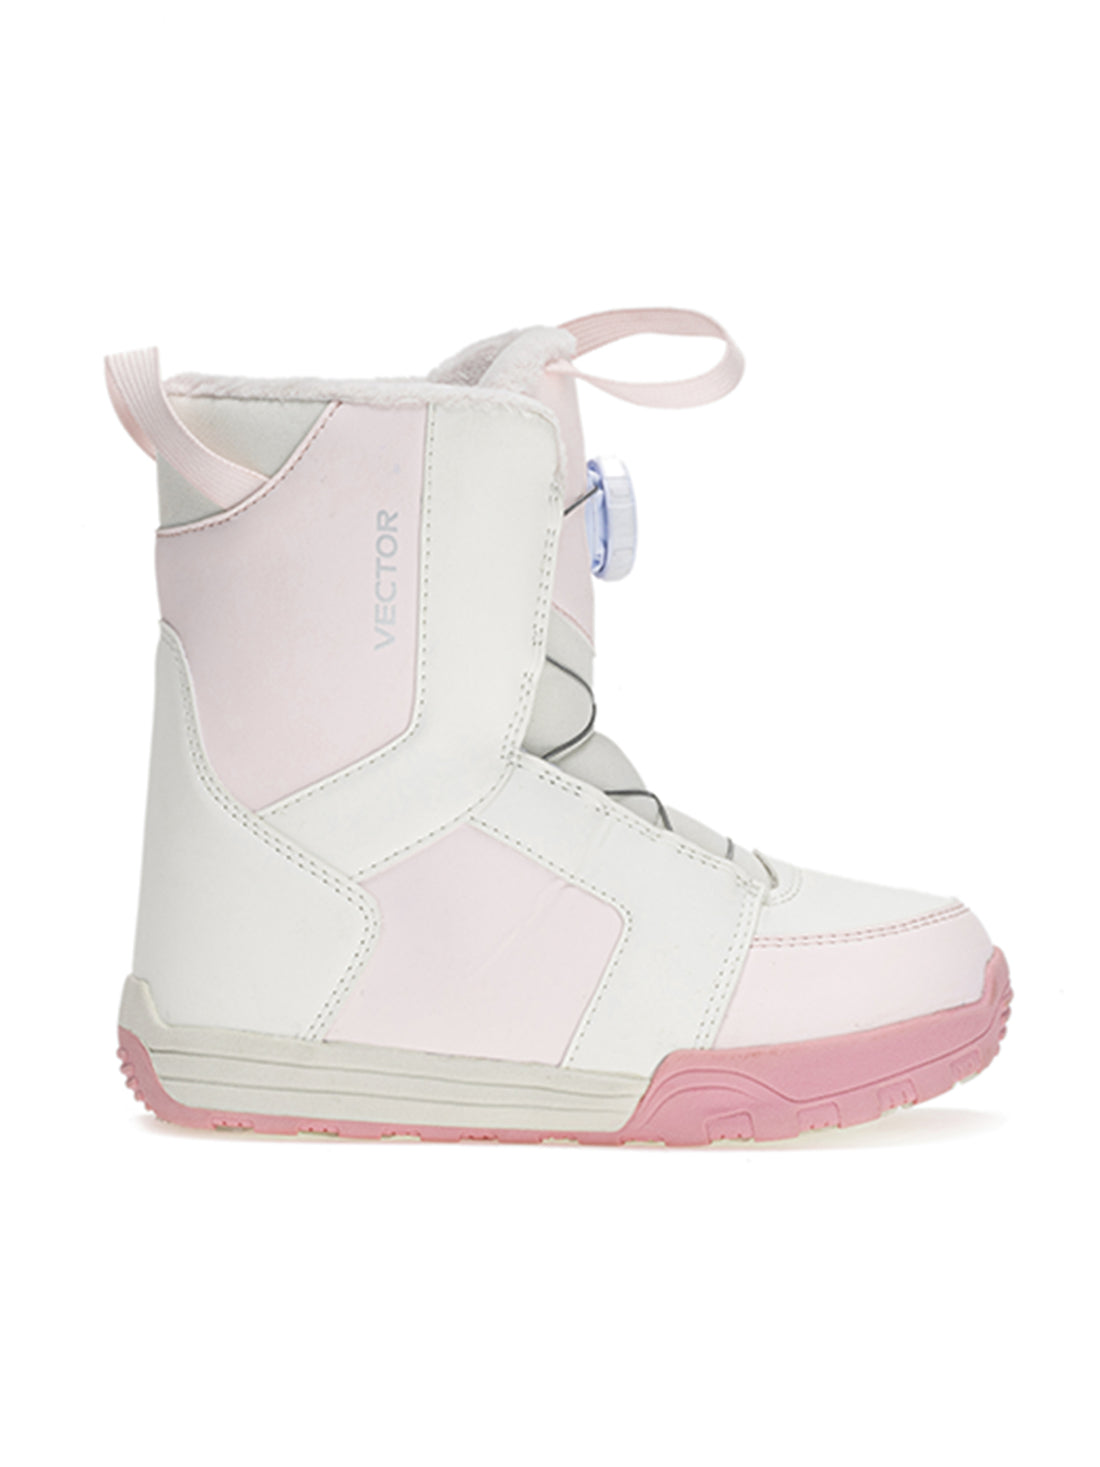 Kids' Utility Snowboard Boots